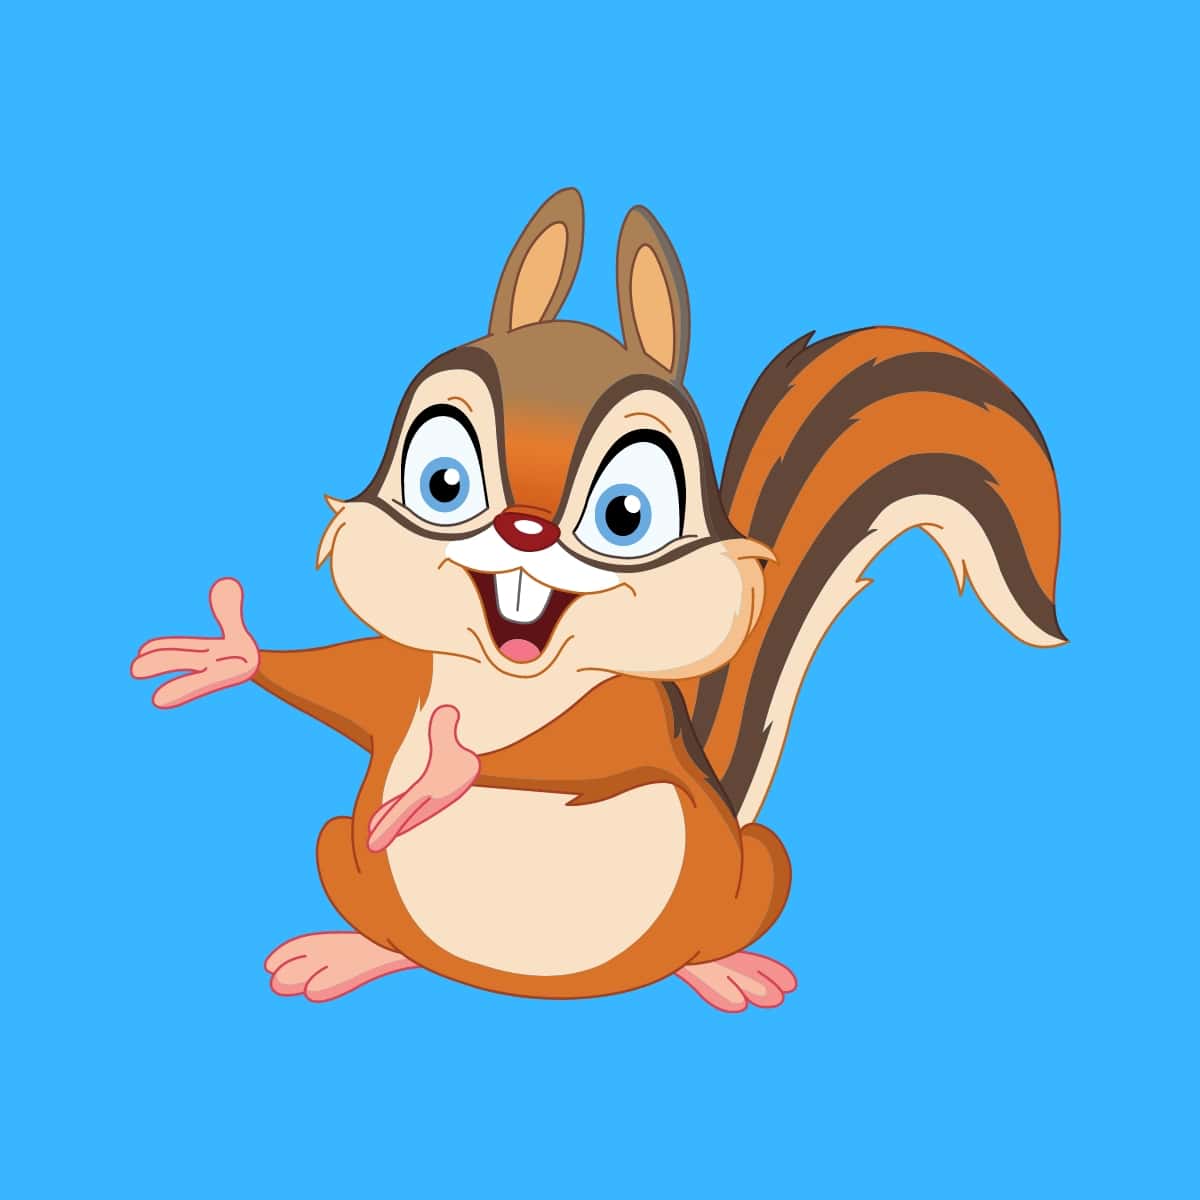 Cartoon graphic of a cute smiling chipmunk with its hands out on a blue background.